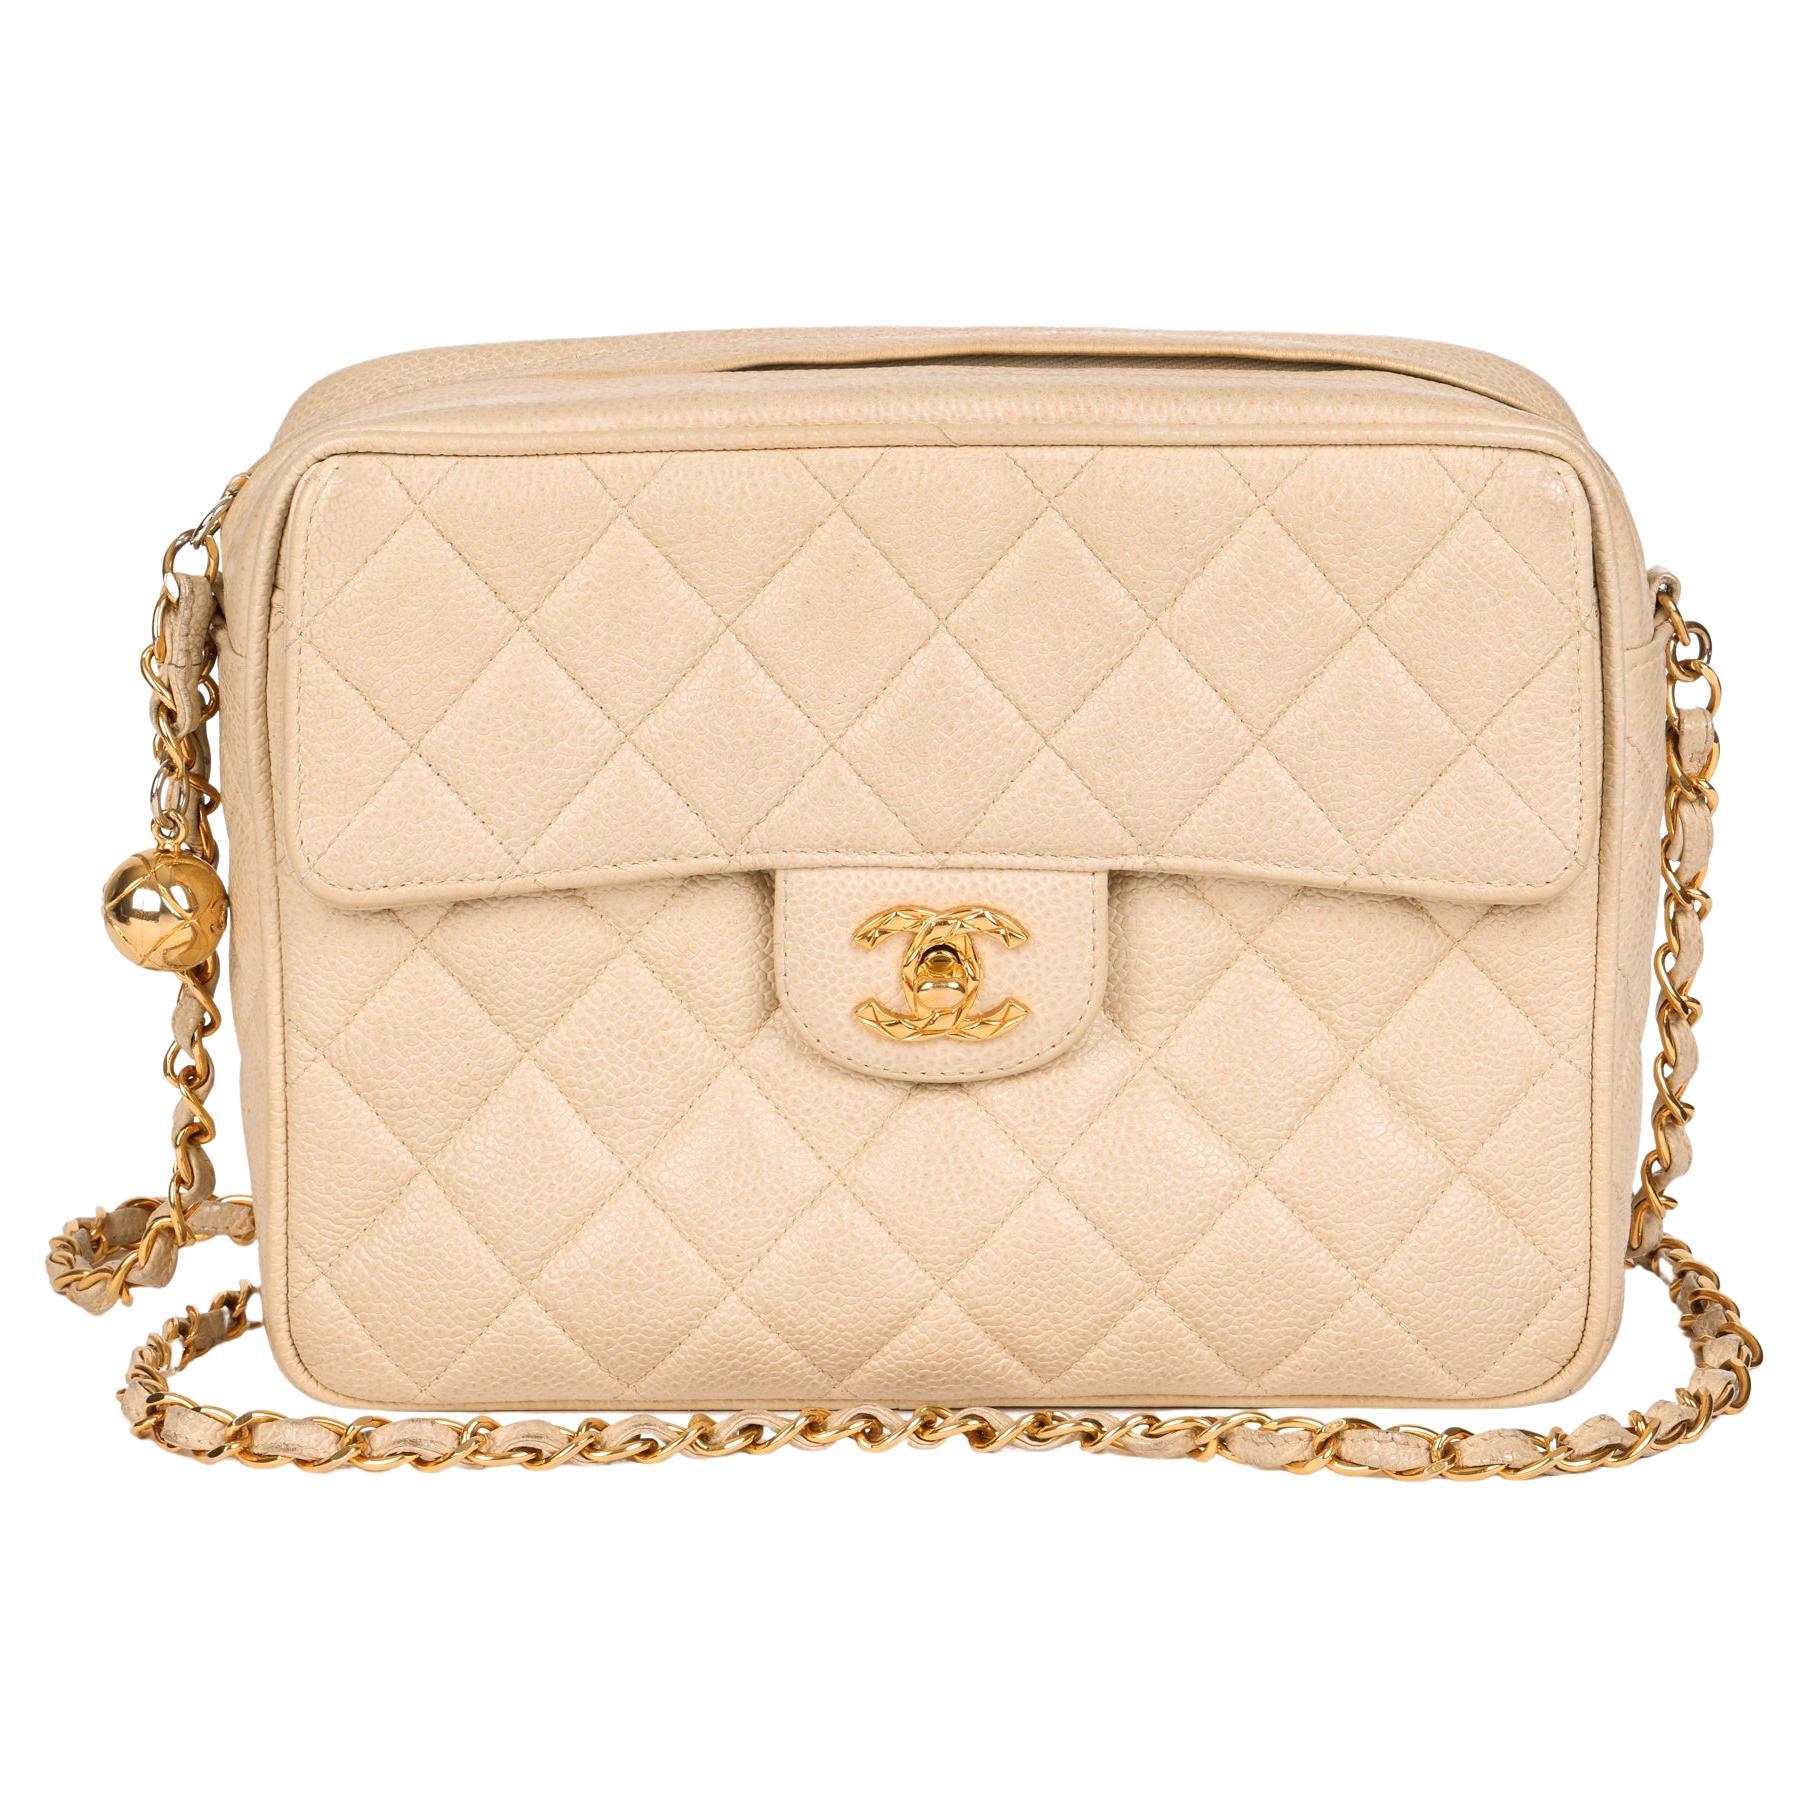 CHANEL Beige Quilted Caviar Leather Vintage Small Classic Camera Bag